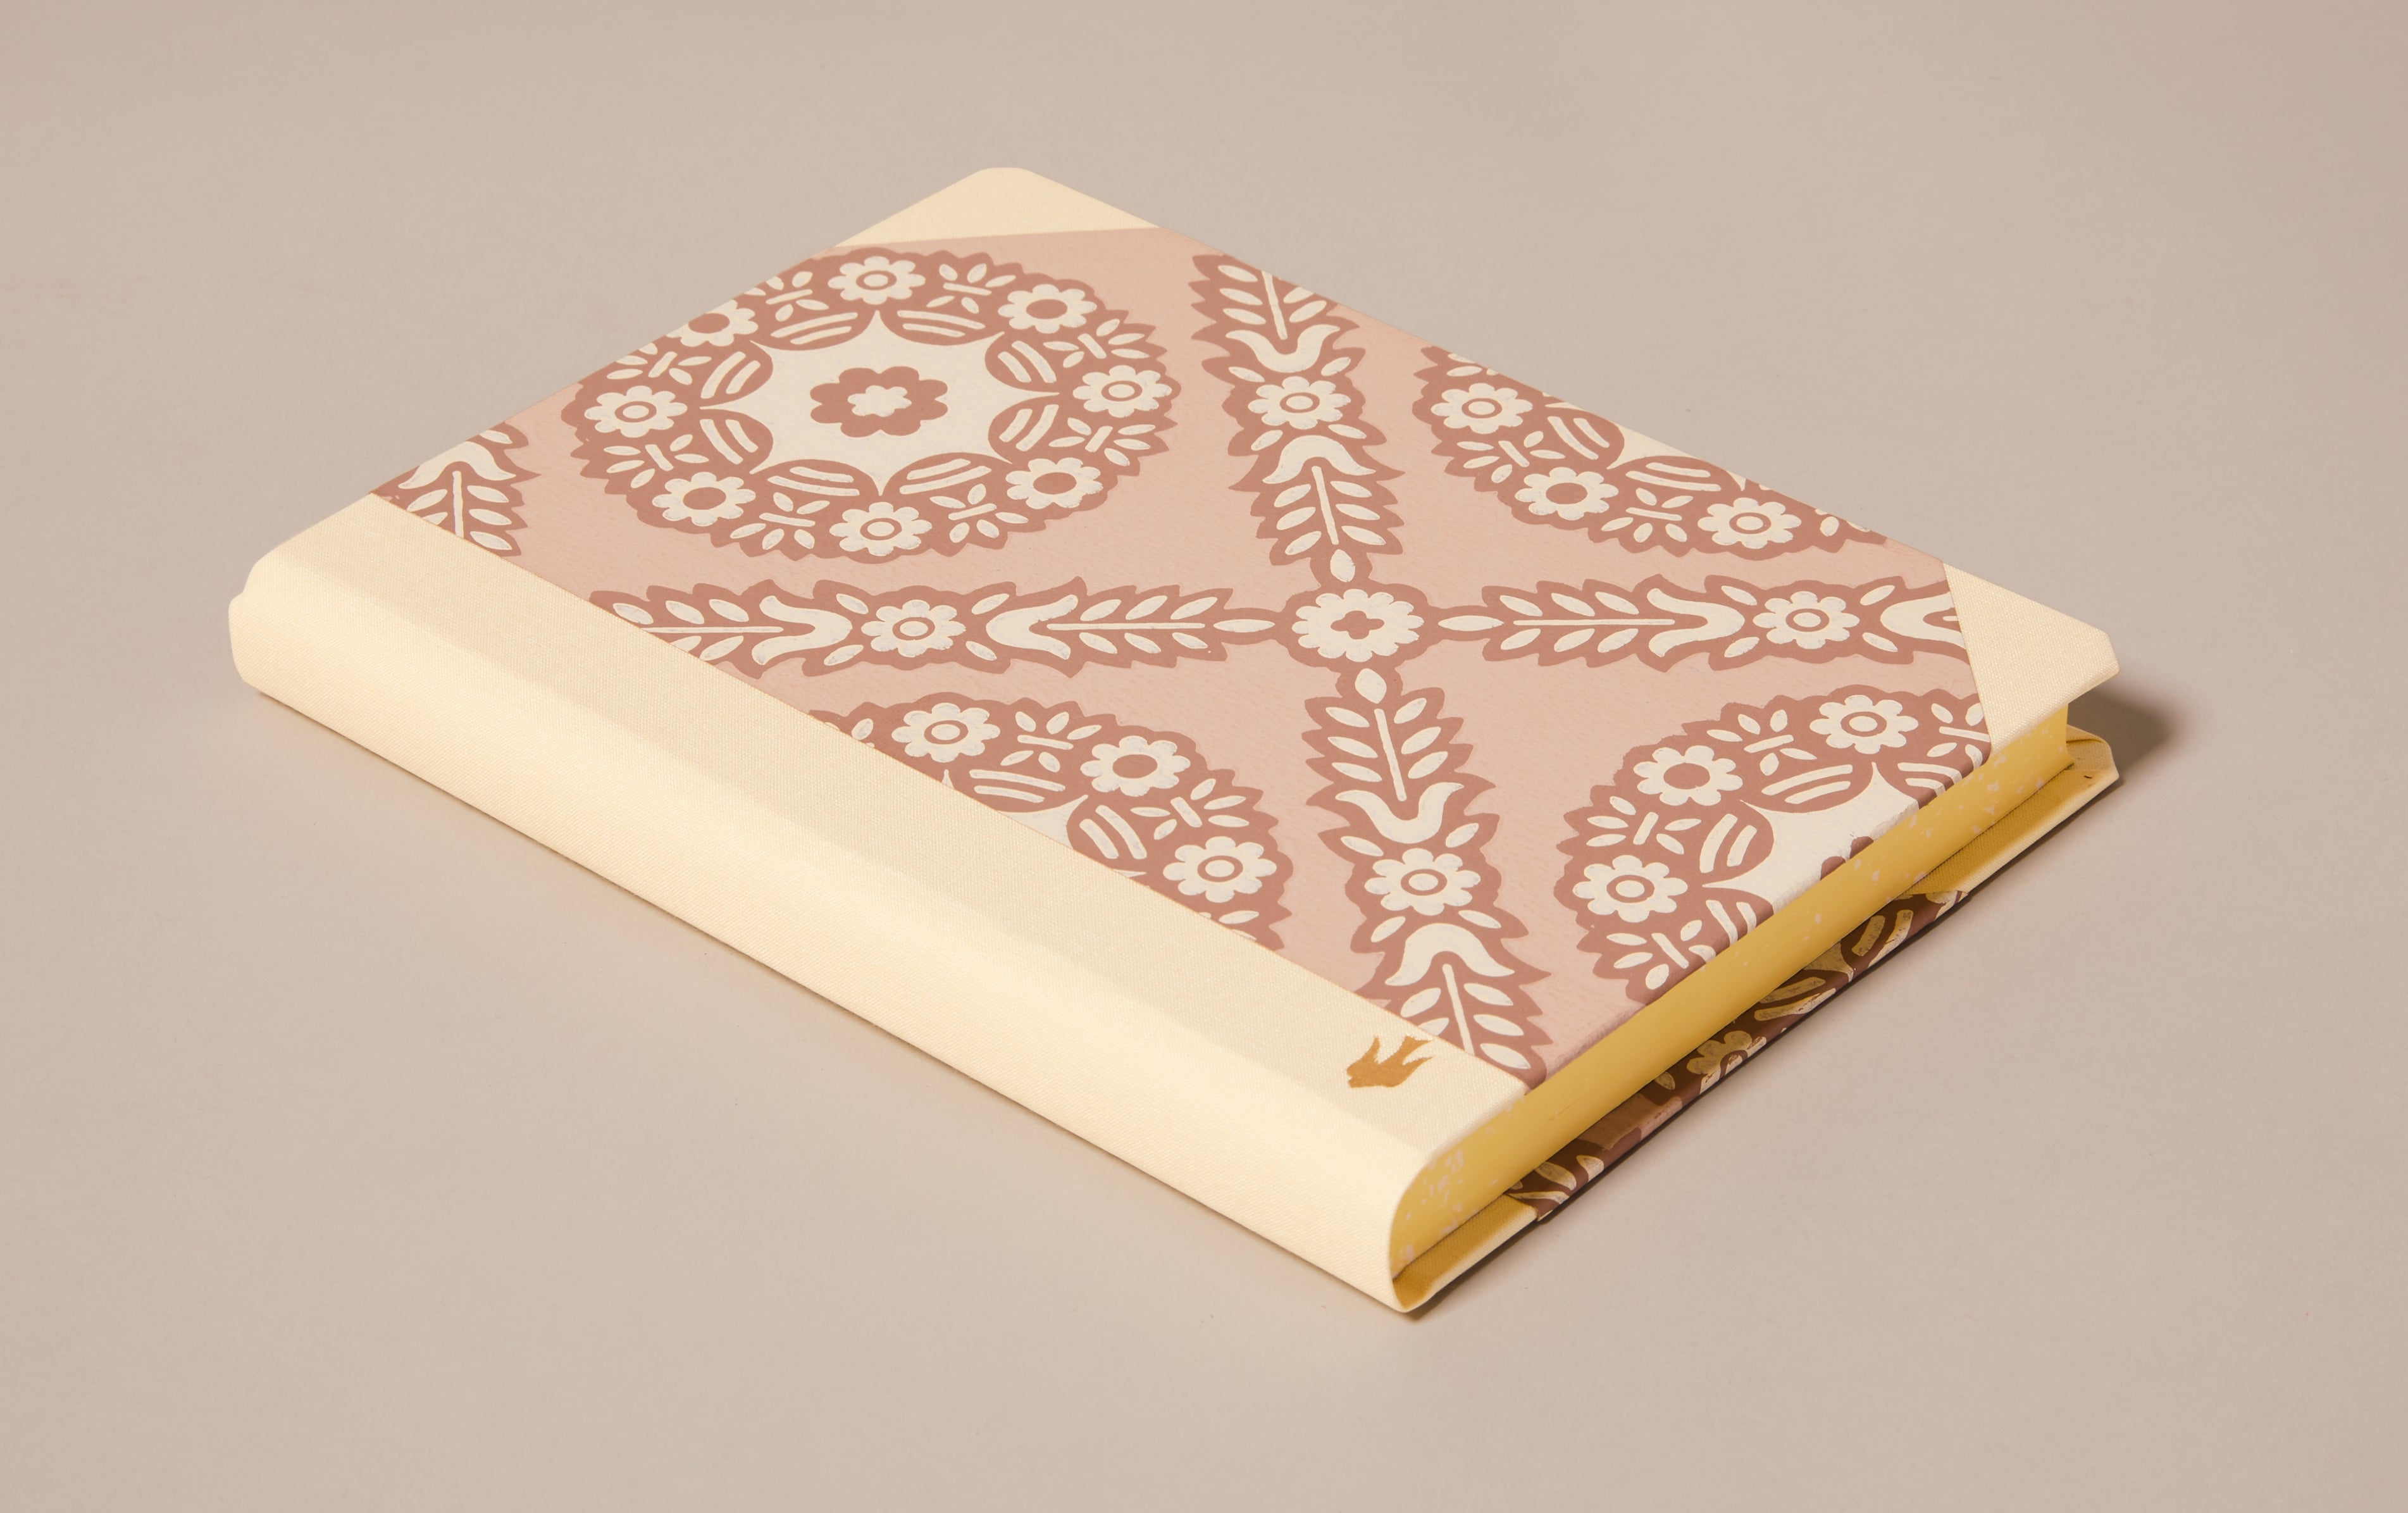 Extra-Thick "Composition Ledger" Wallpaper Collection Notebook, Laurel Trellis